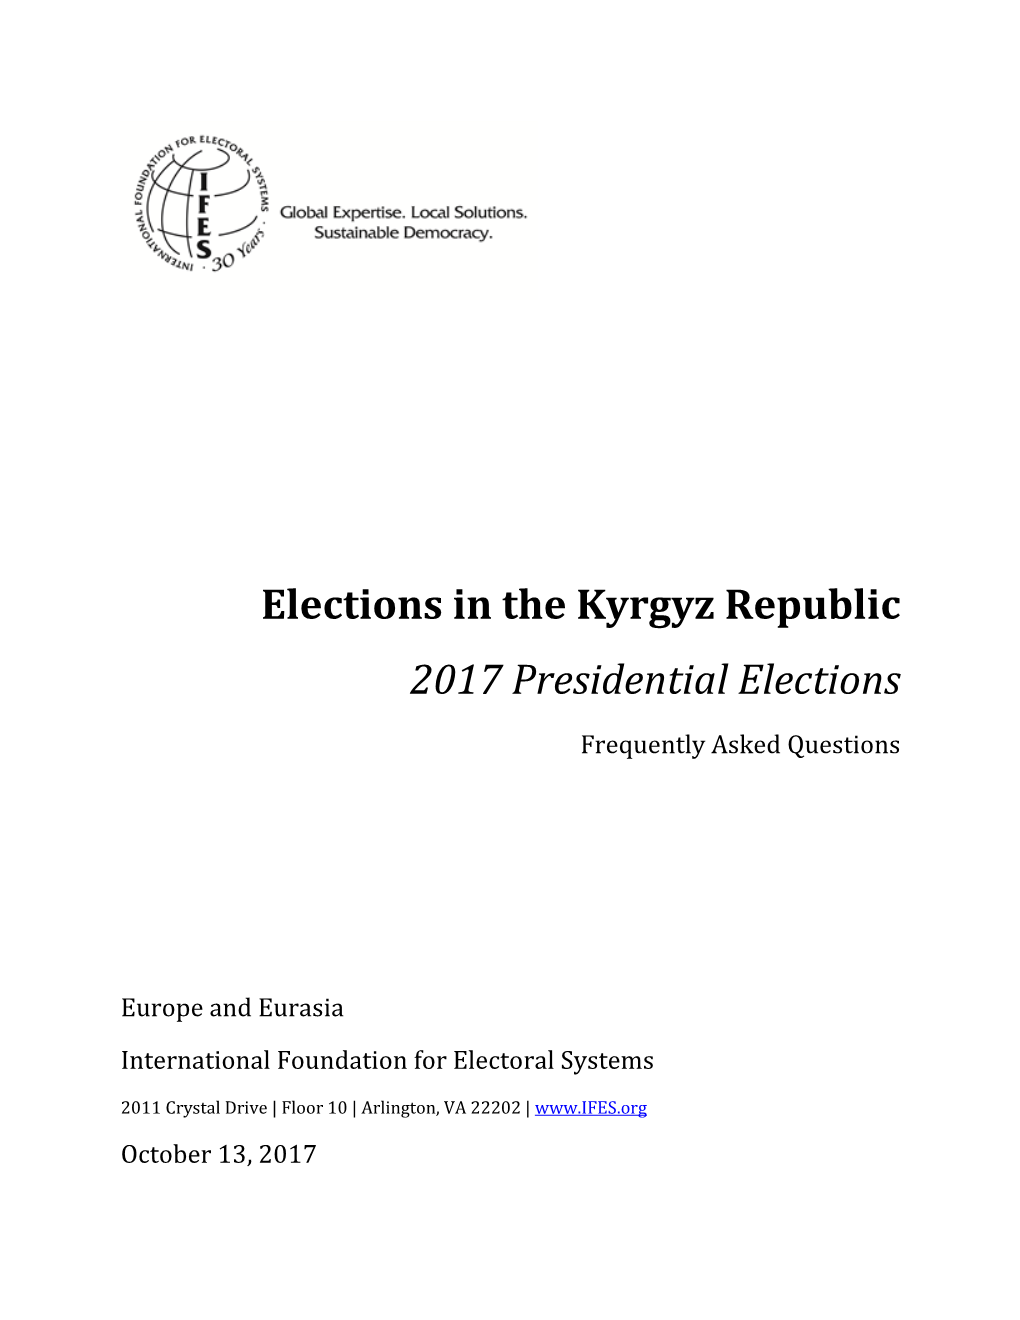 Elections in the Kyrgyz Republic: 2017 Presidential Elections Frequently Asked Questions